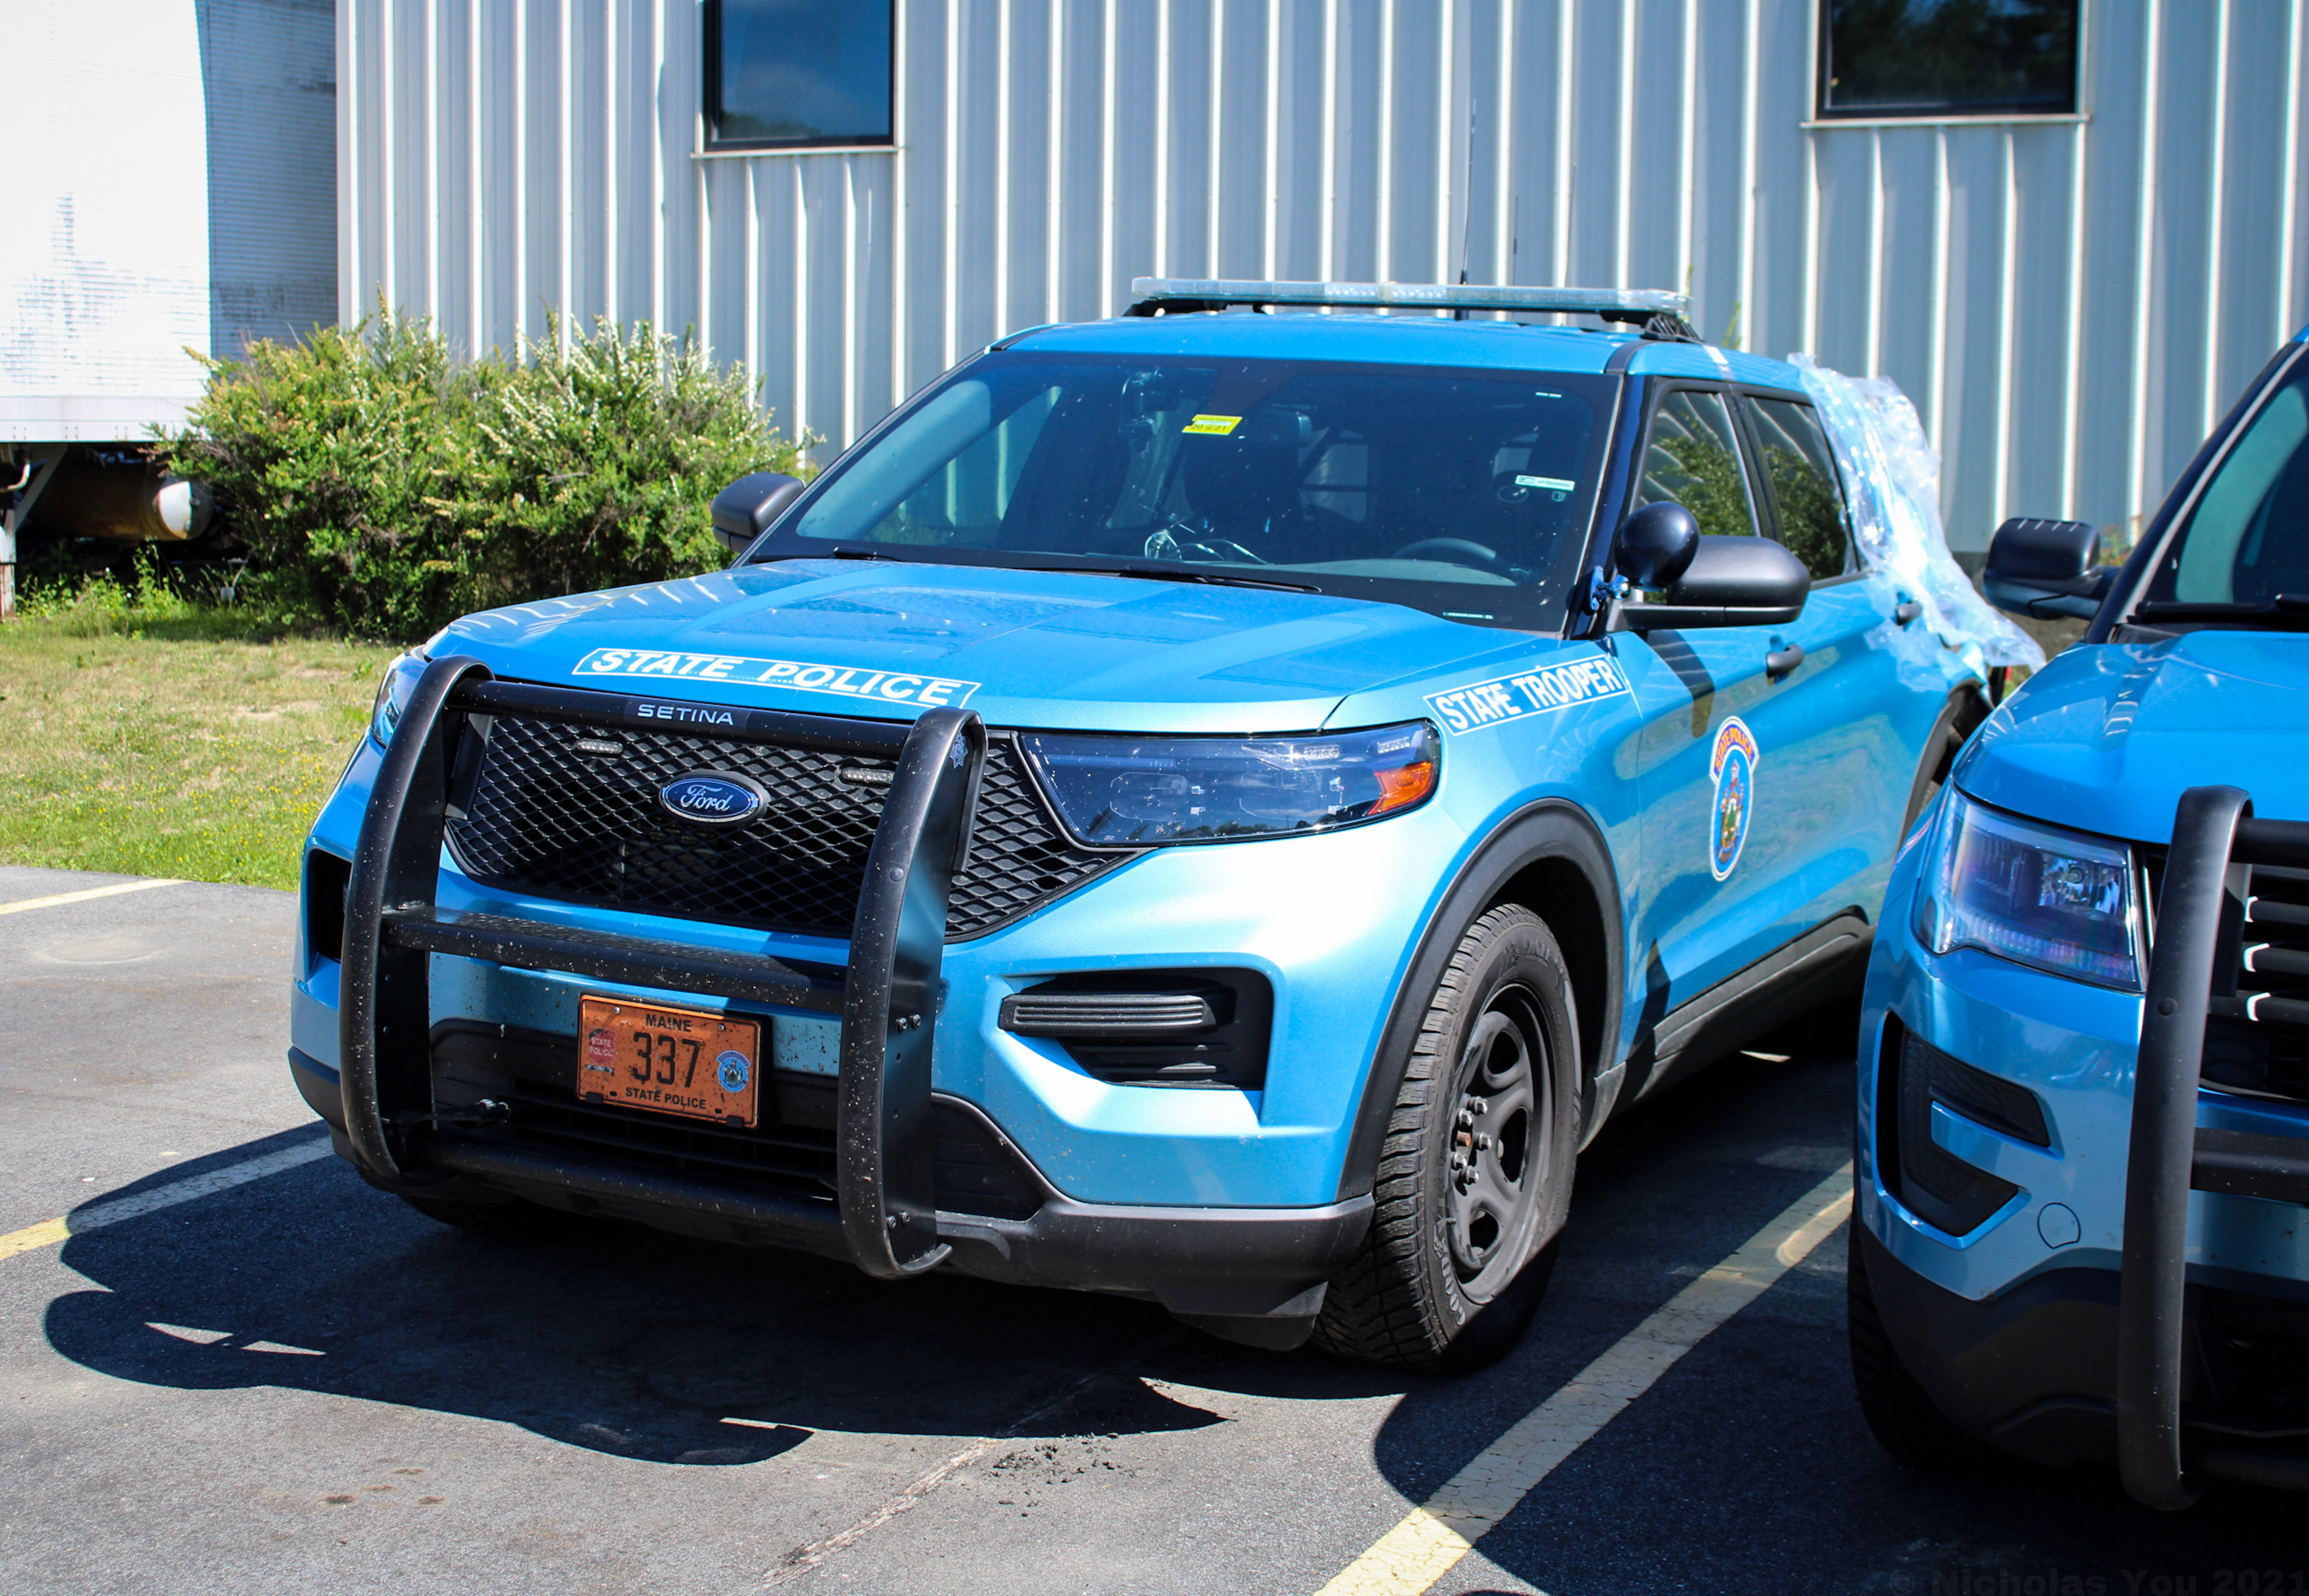 A photo  of Maine State Police
            Cruiser 337, a 2020-2021 Ford Police Interceptor Utility             taken by Nicholas You